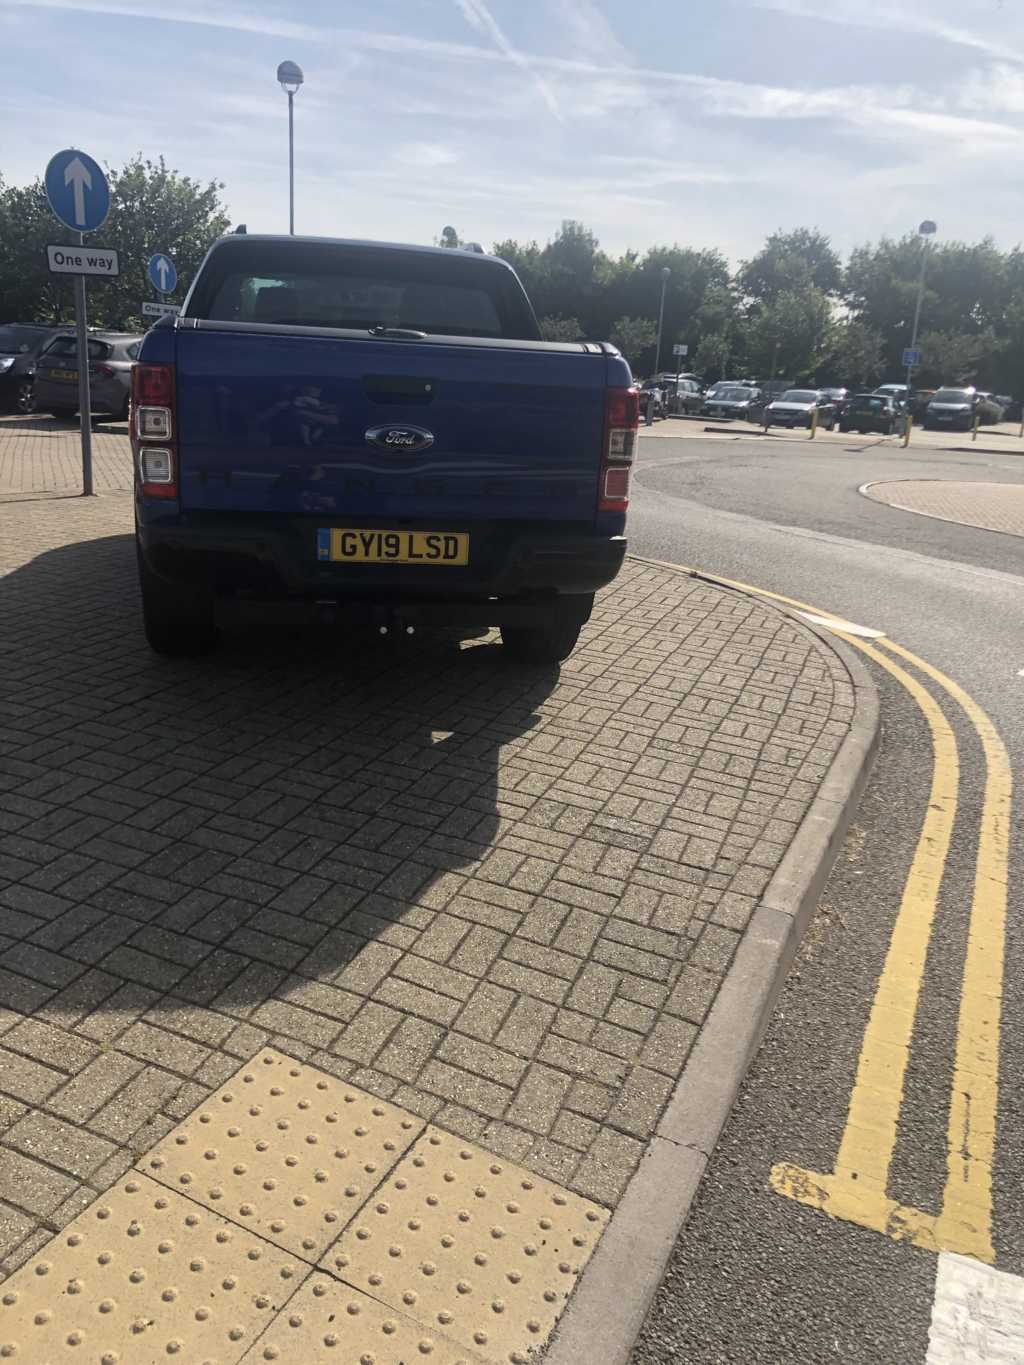 GY19 LSD displaying Inconsiderate Parking